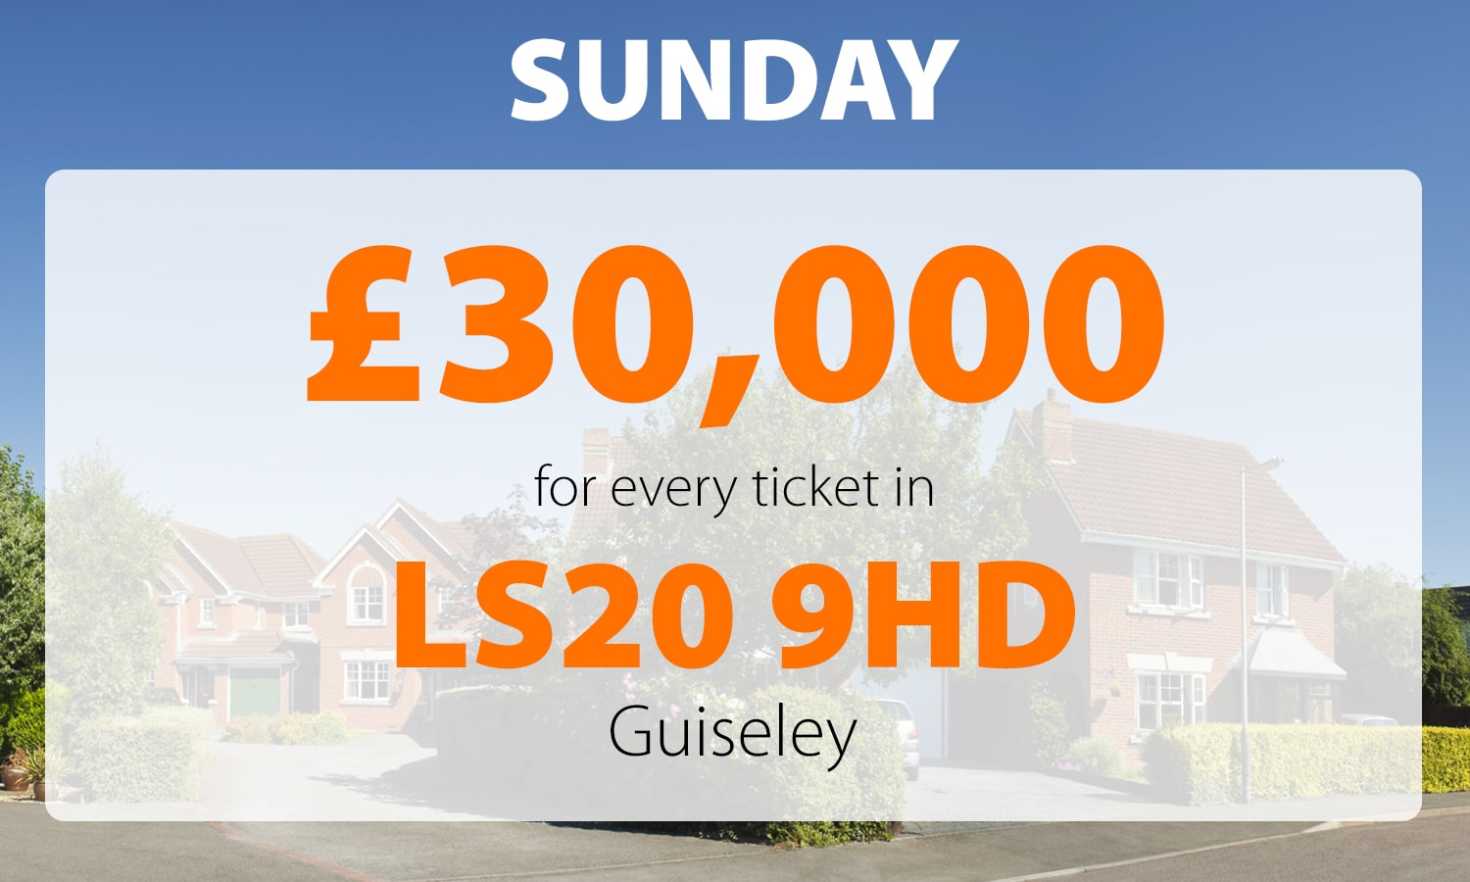 One lucky winner from Guiseley has scooped an amazing £30,000 in Sunday's Street Prize